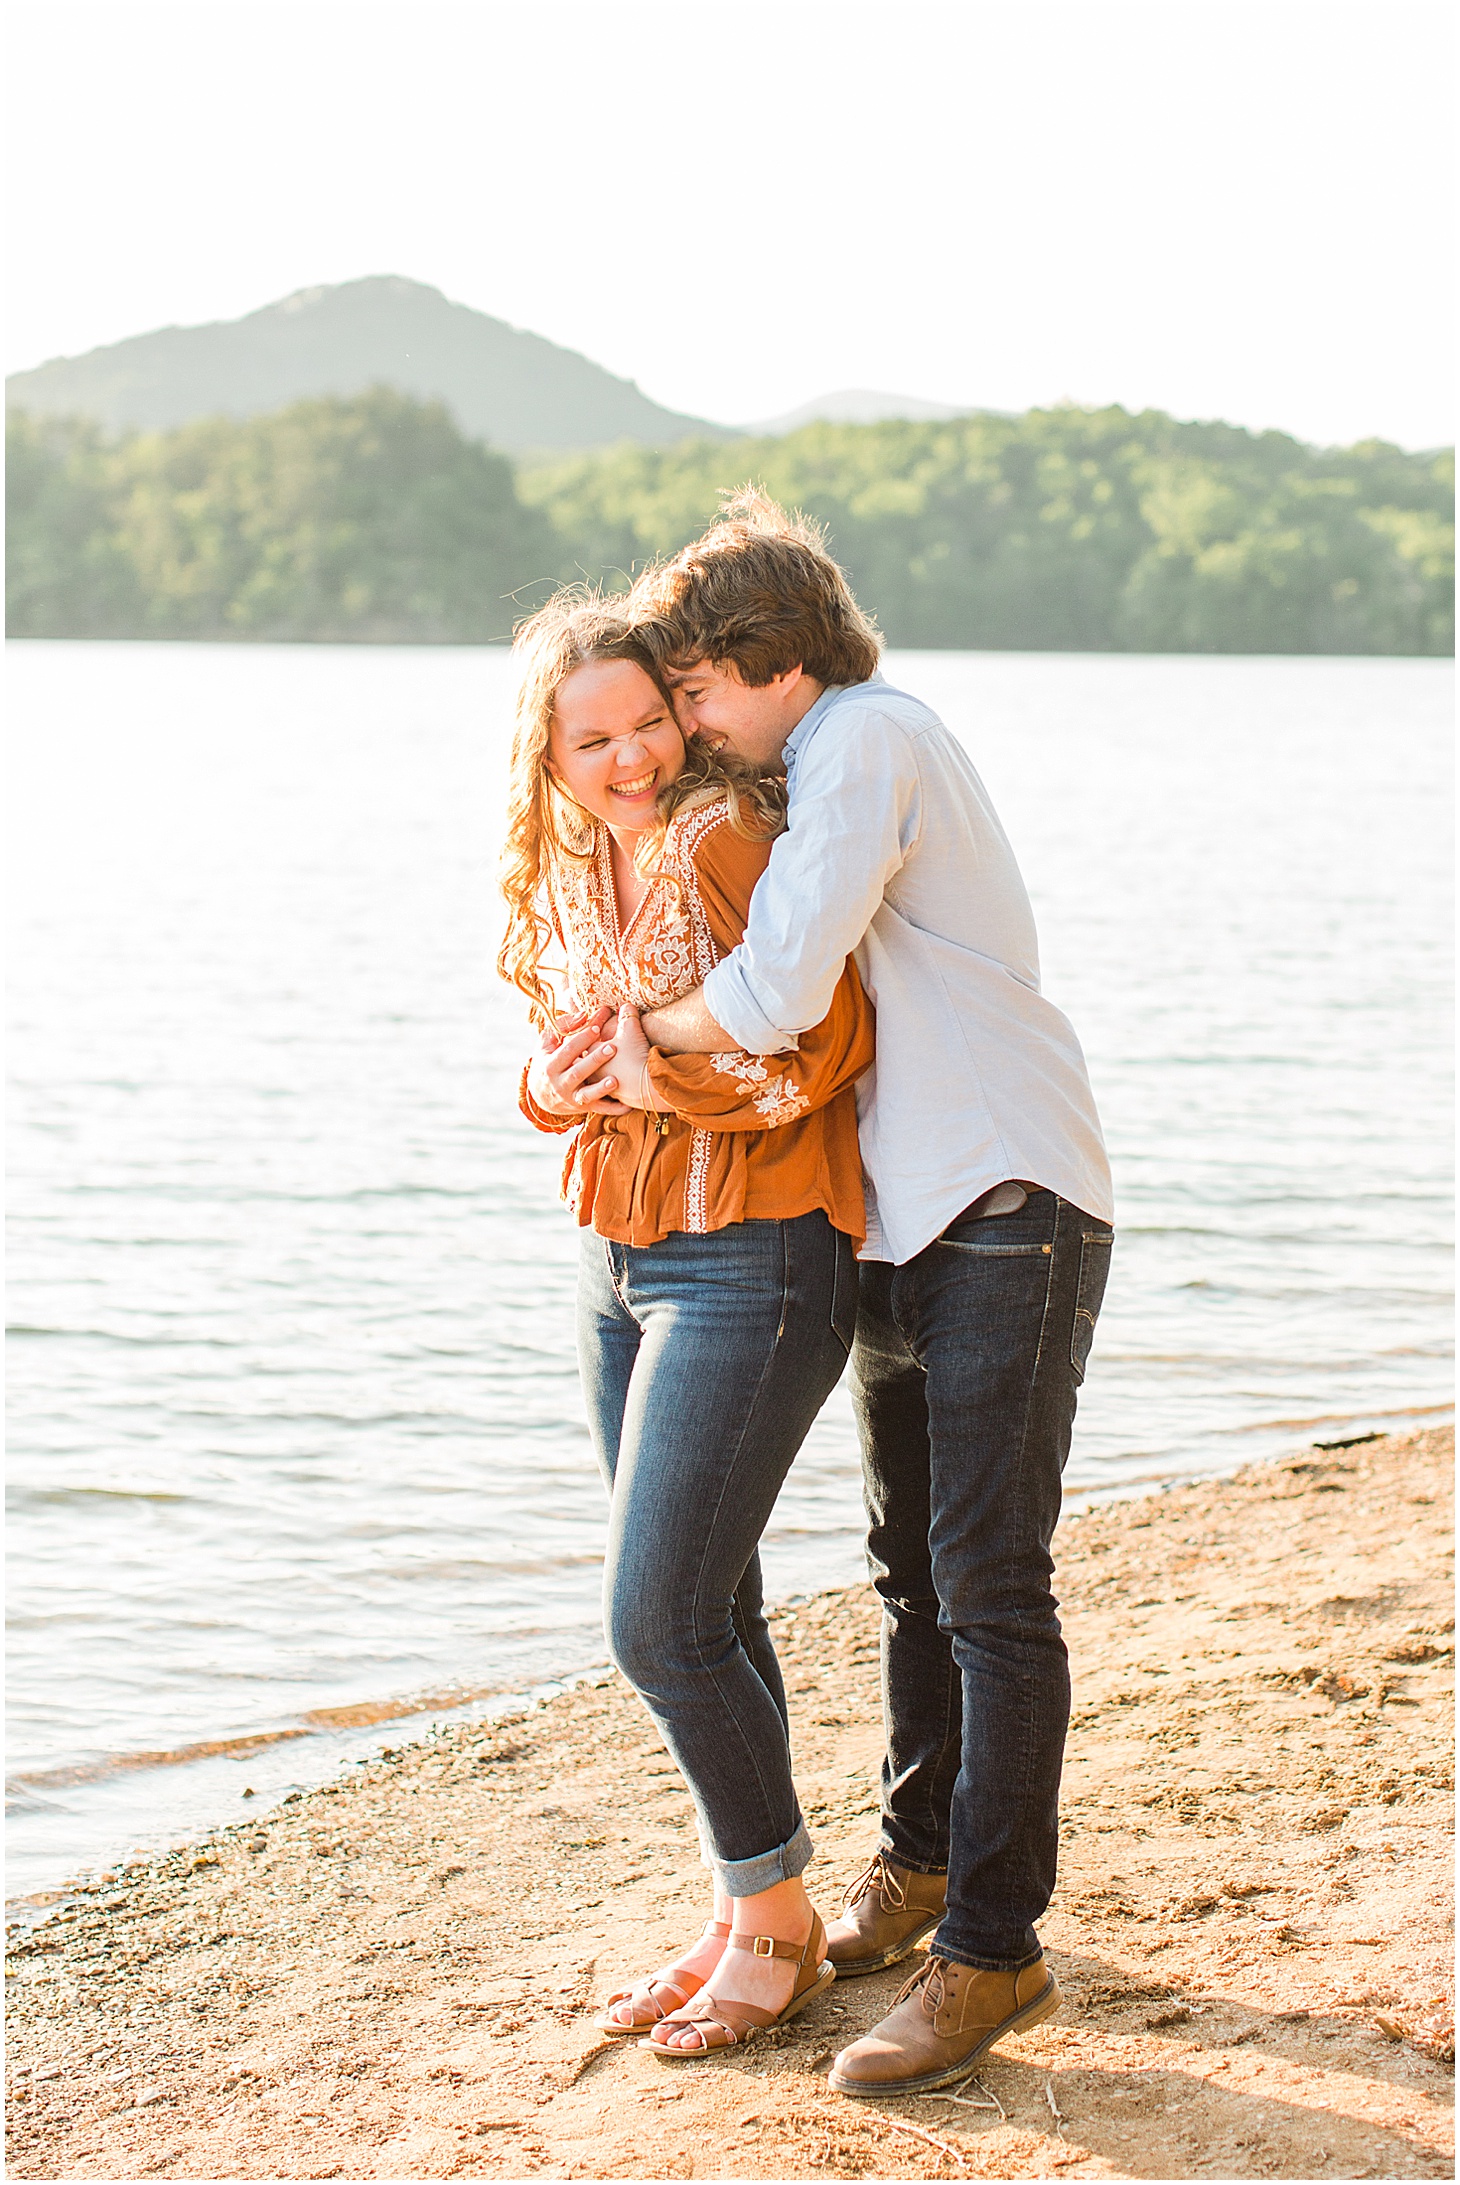 carvinscoveengagementsession_roanokeengagementsession_carvinscove_virginiawedding_virginiaweddingphotographer_vaweddingphotographer_photo_0016.jpg